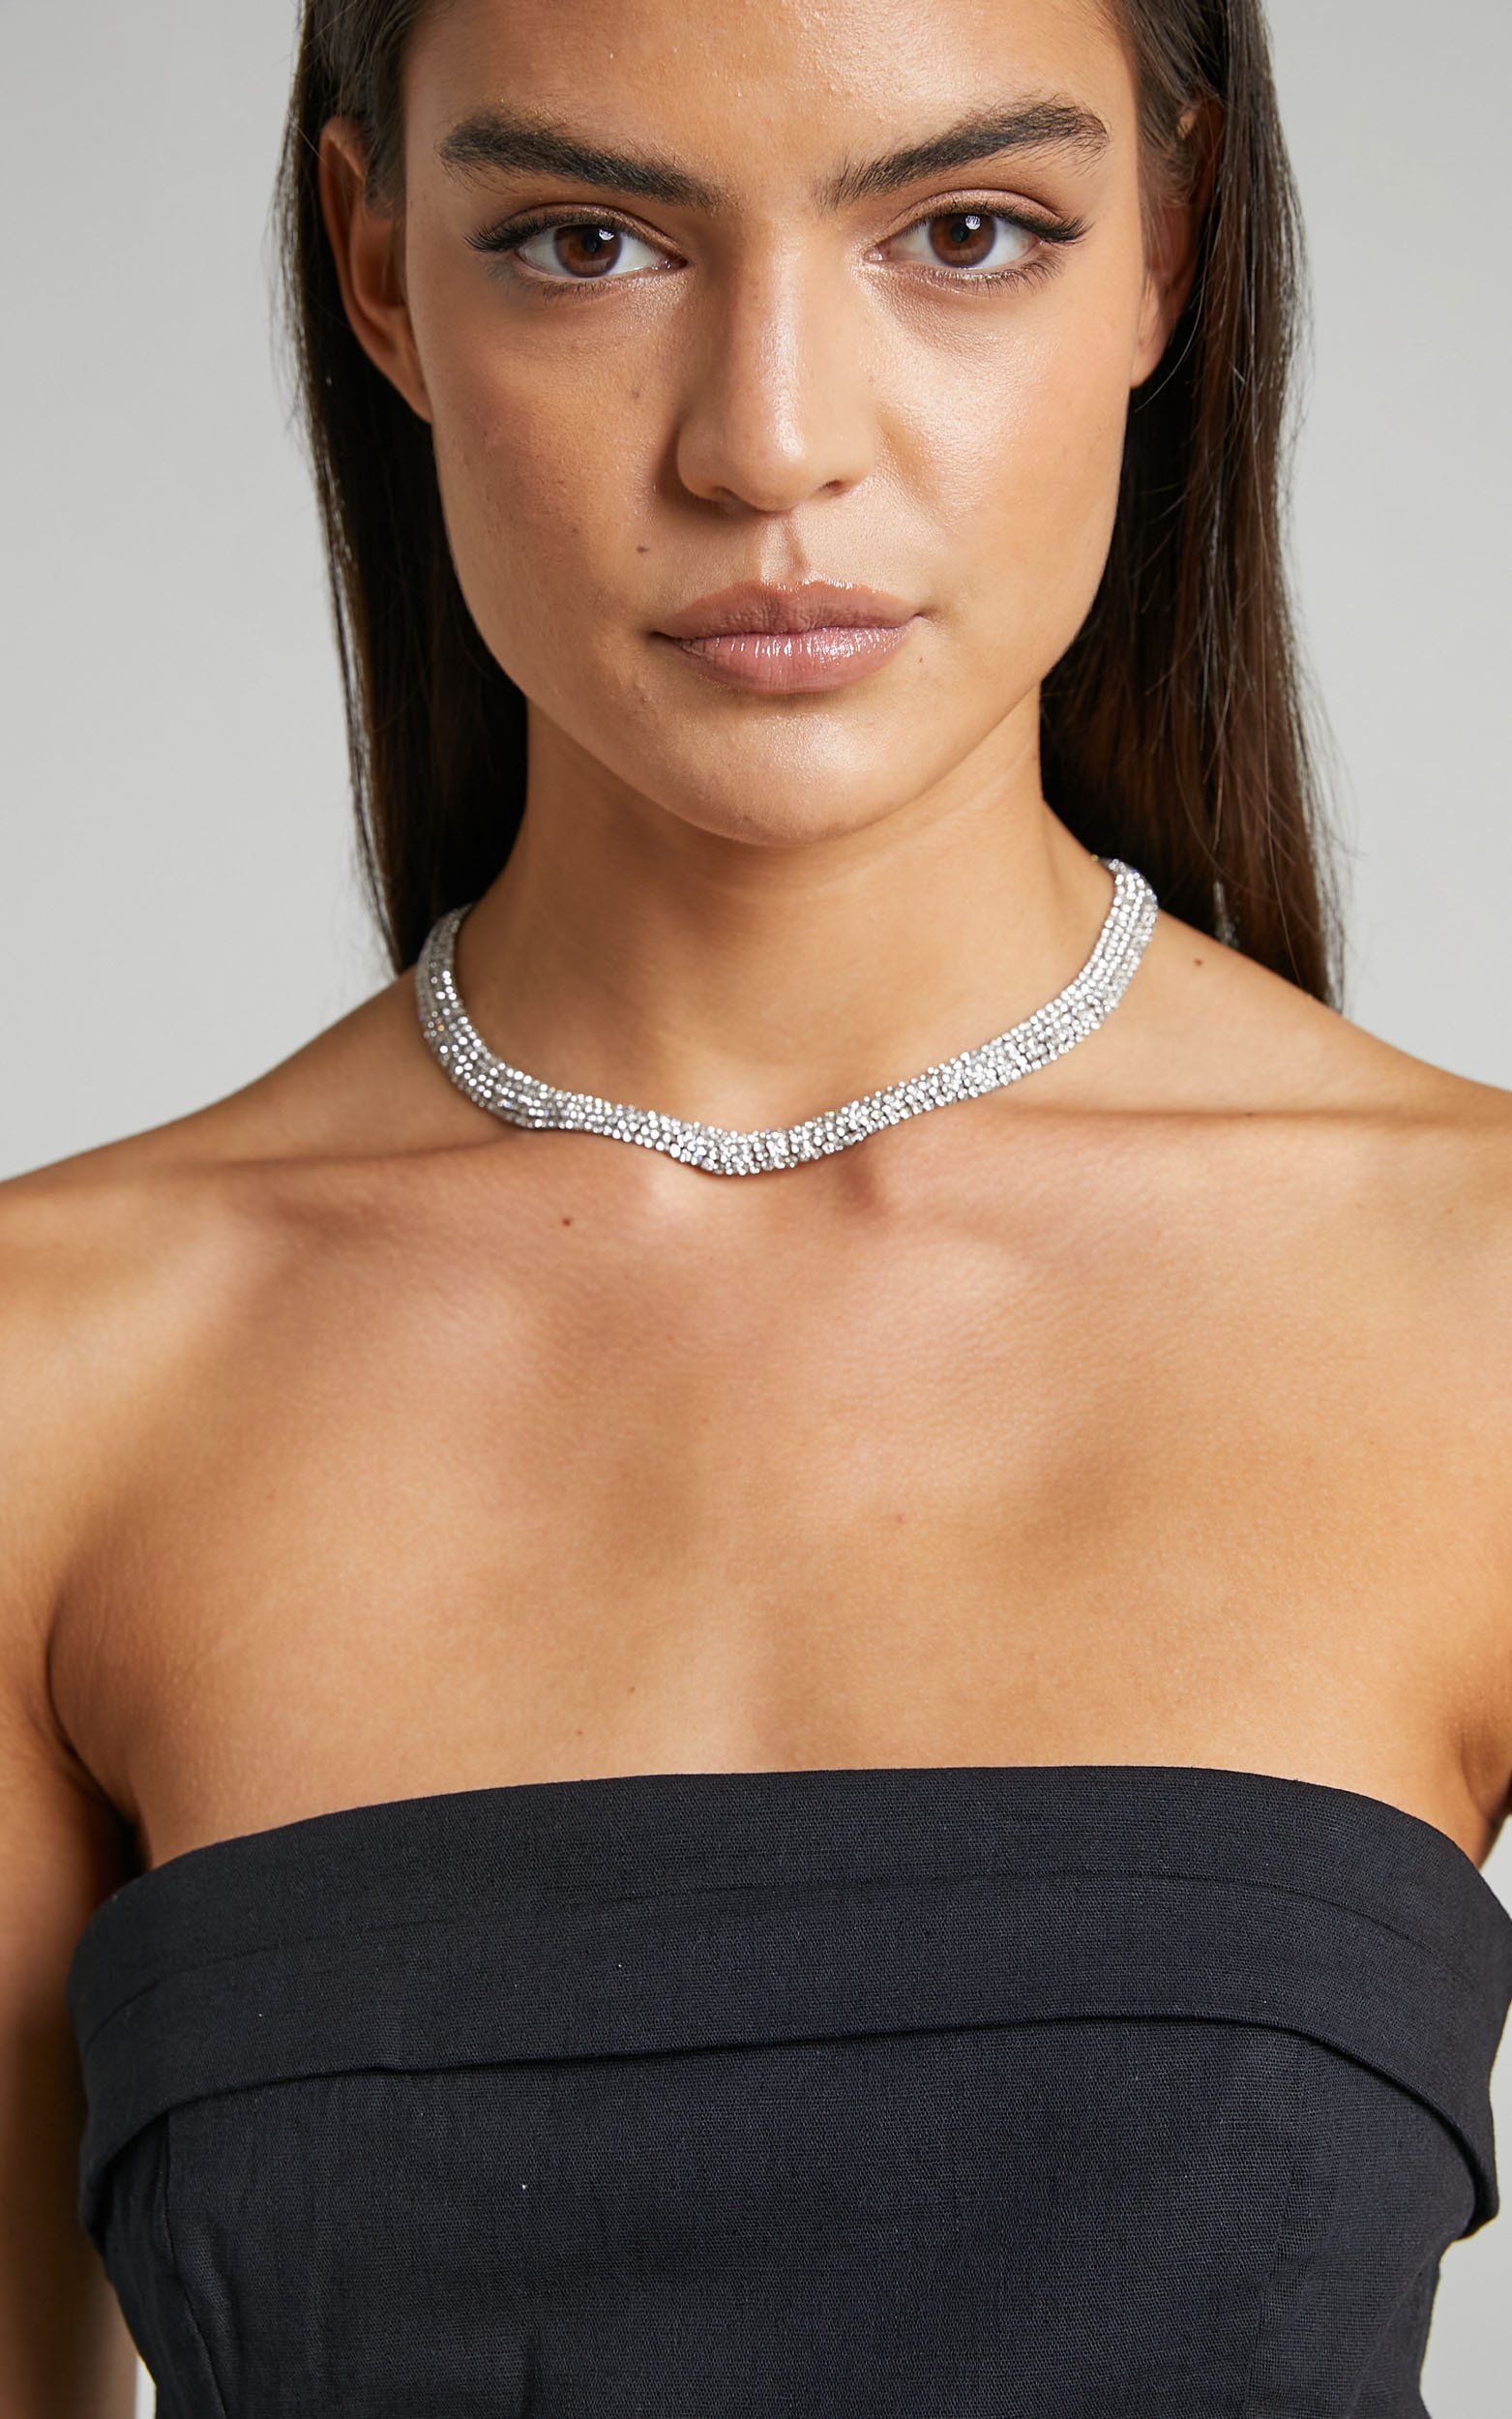 Guenloie Diamante Choker Necklace in Silver - NoSize, SLV1, hi-res image number null